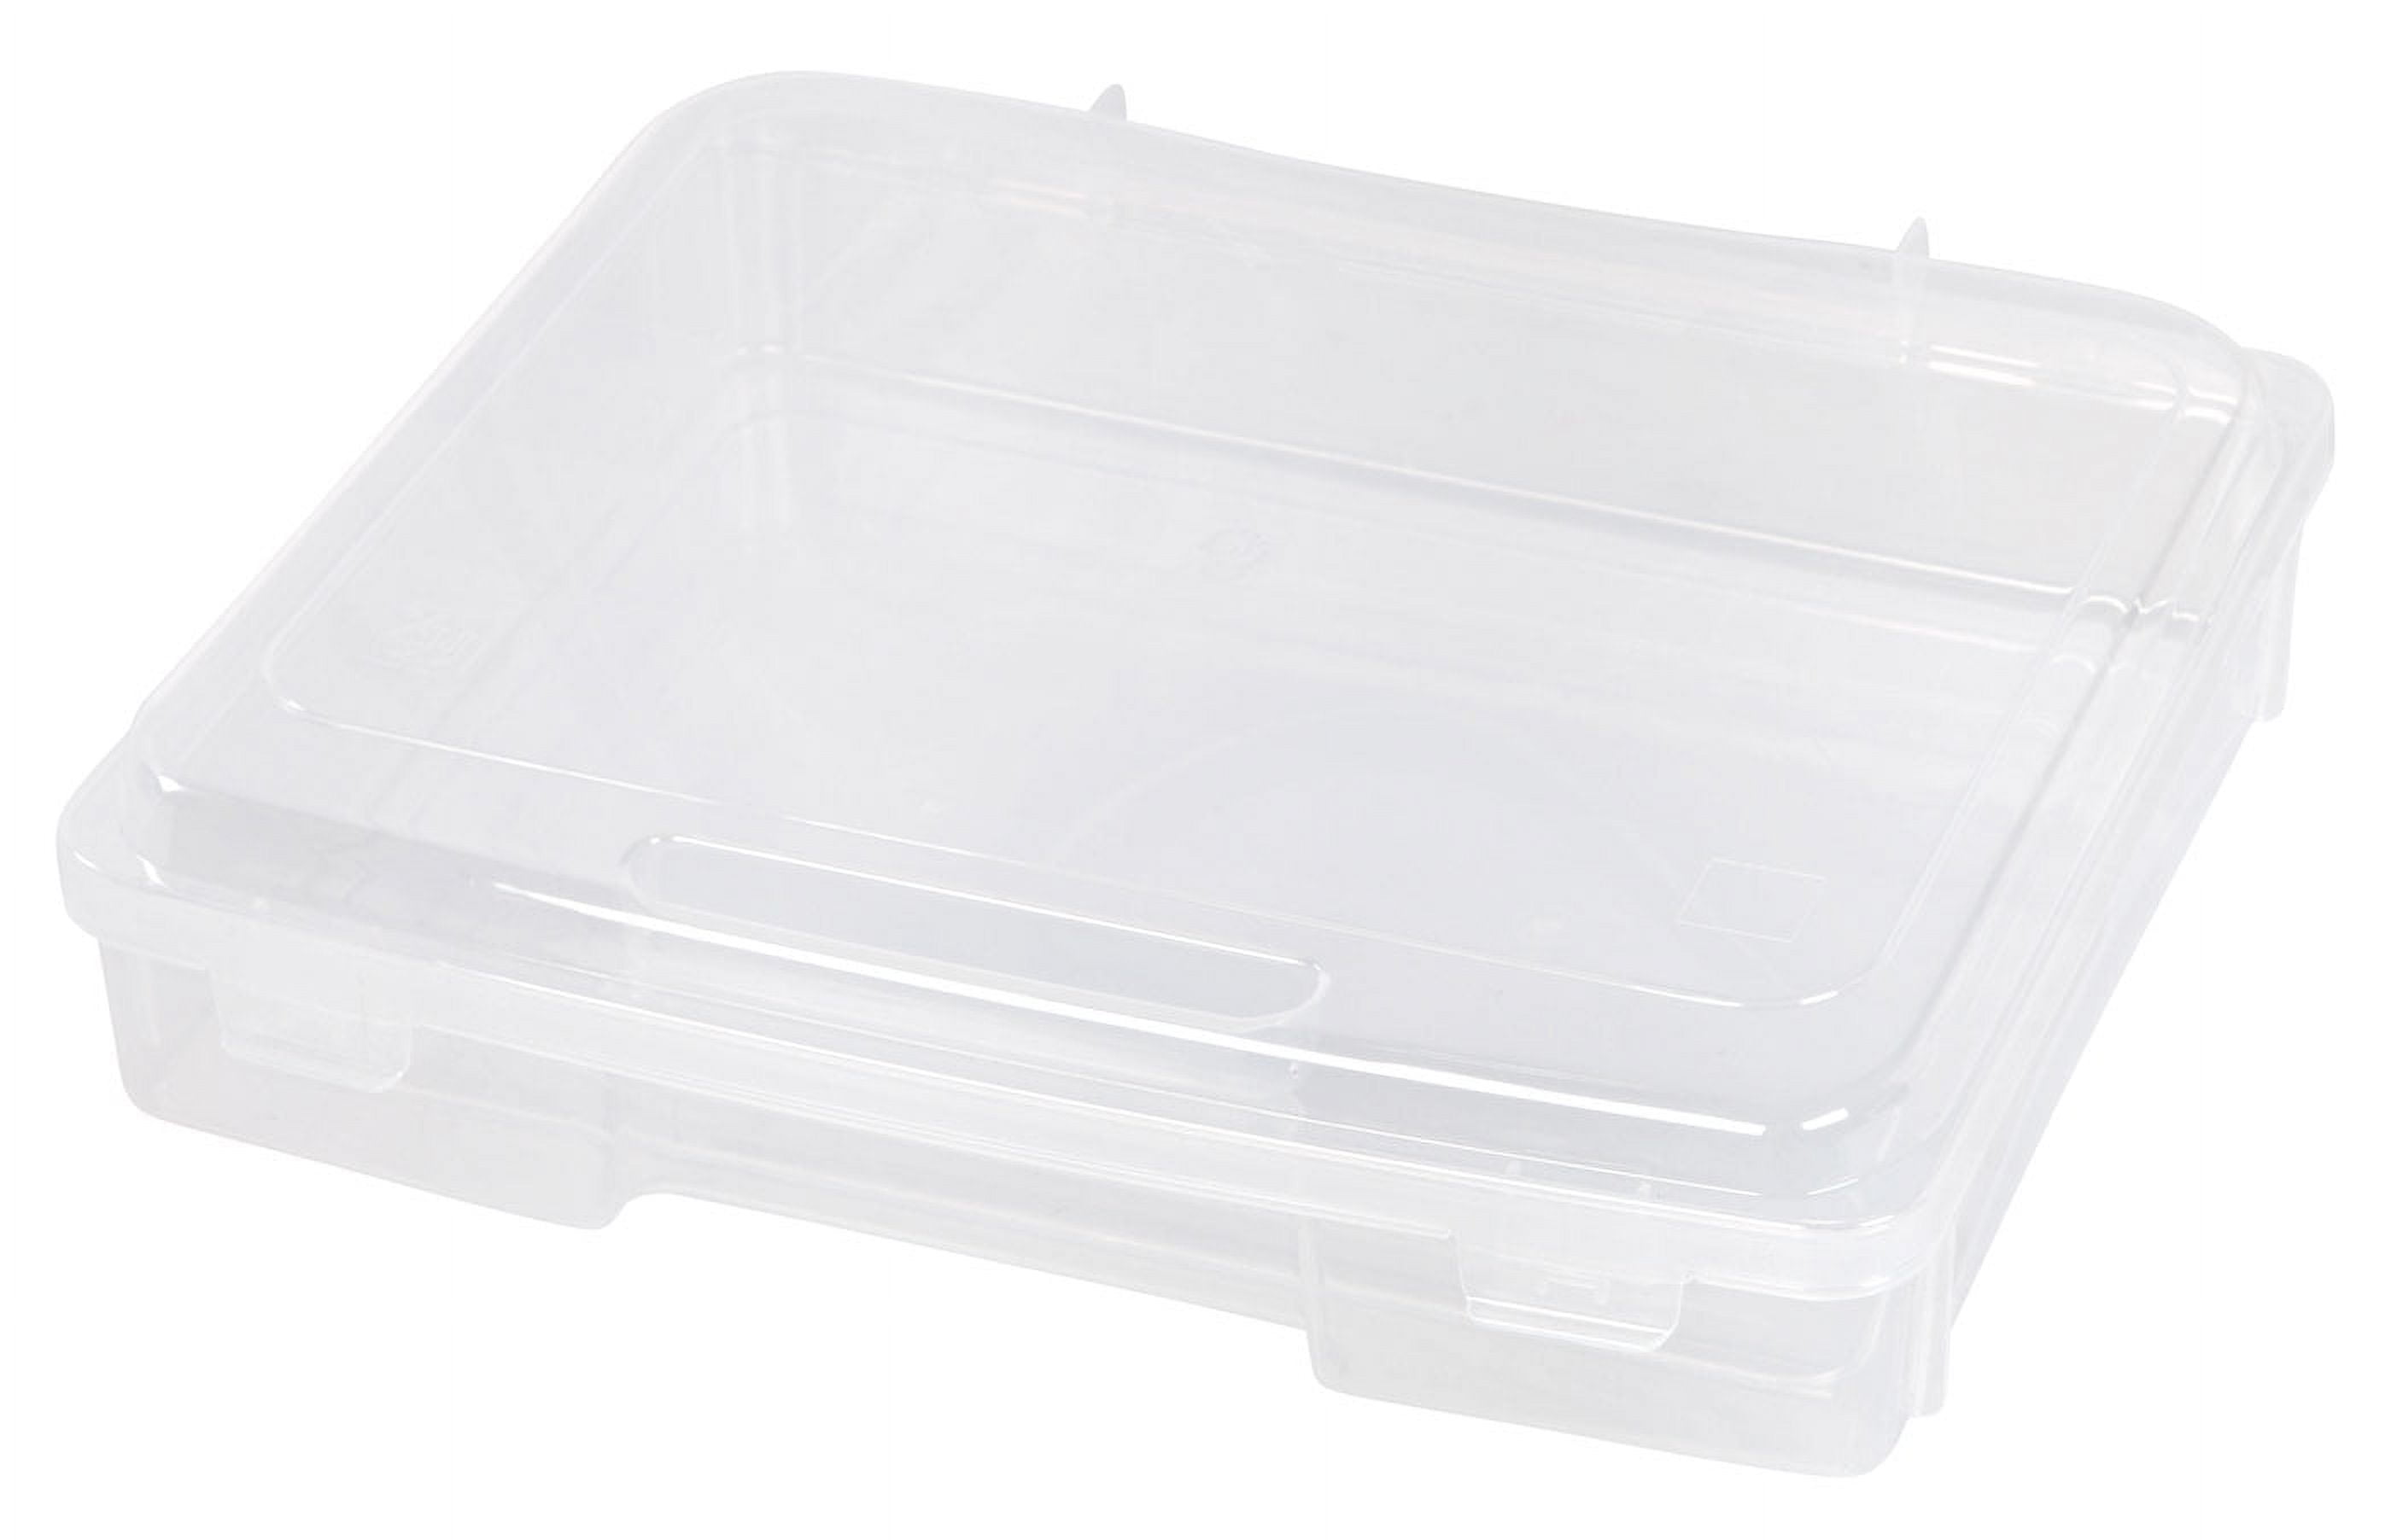 Iris Portable Project Case (Clear)